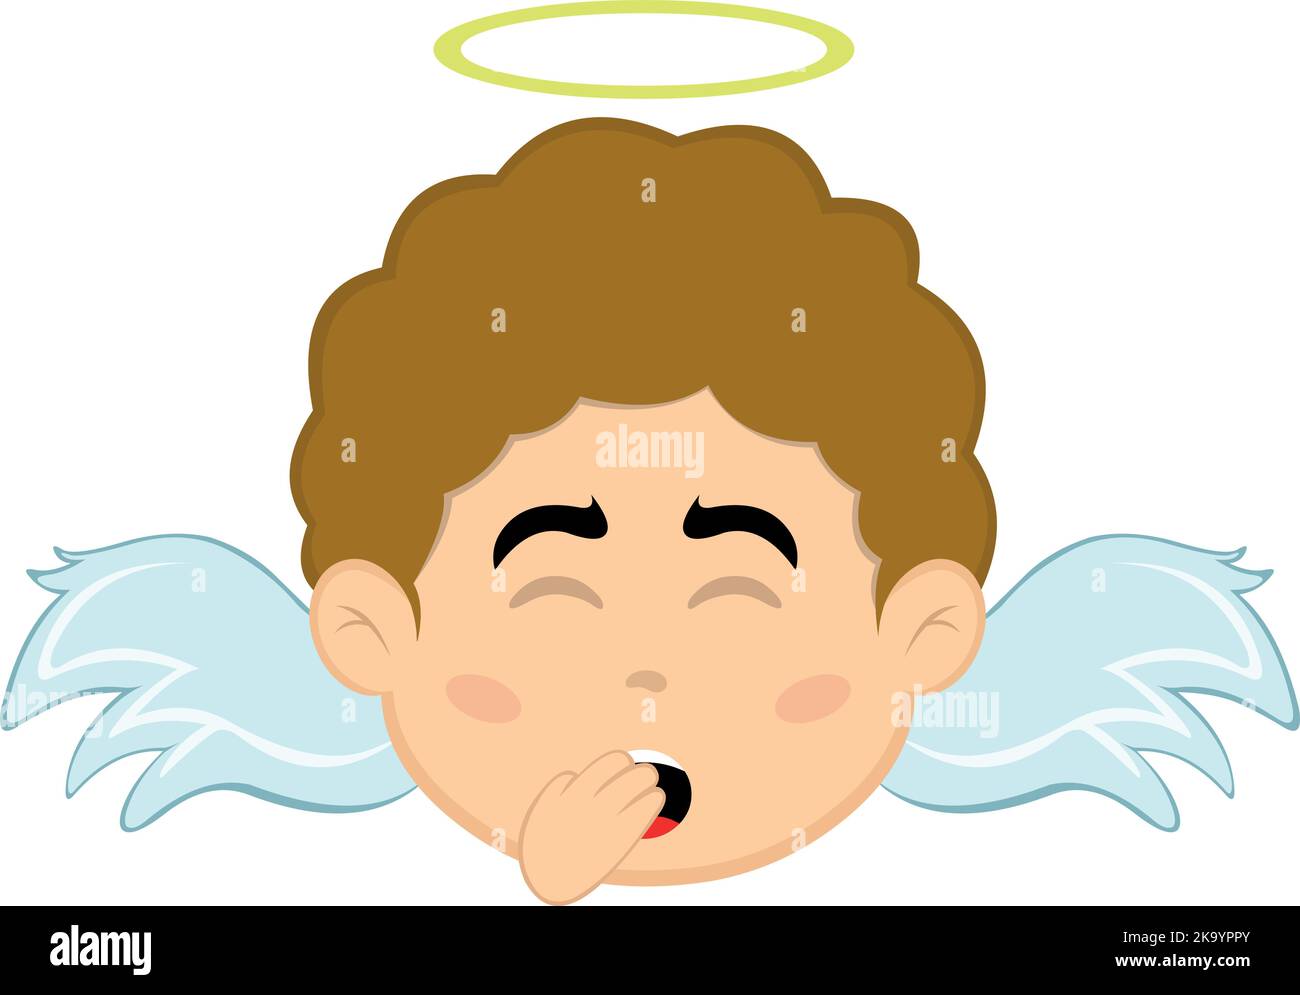 Vector illustration of the face of a cartoon angel boy yawning with his hand on his mouth Stock Vector